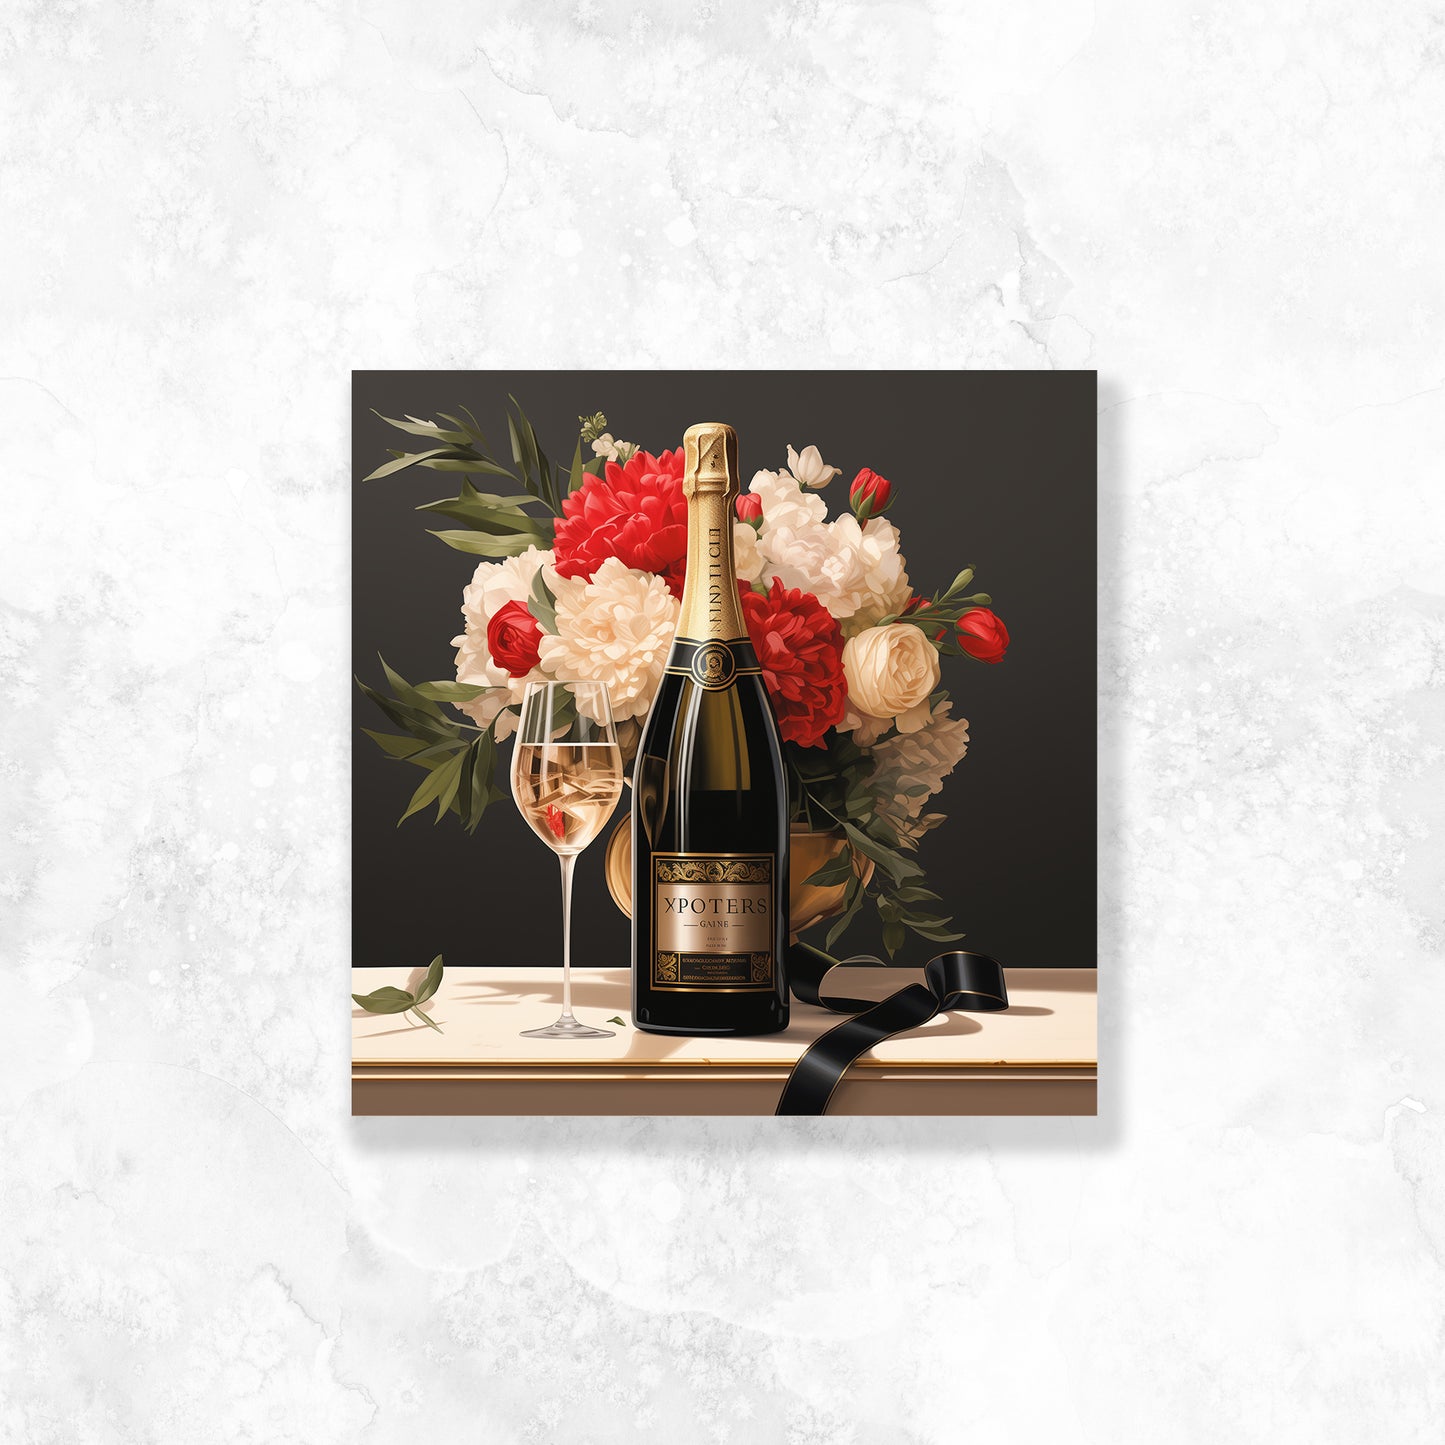 Champagne and flowers Dashboard Stickerbook VOL 22